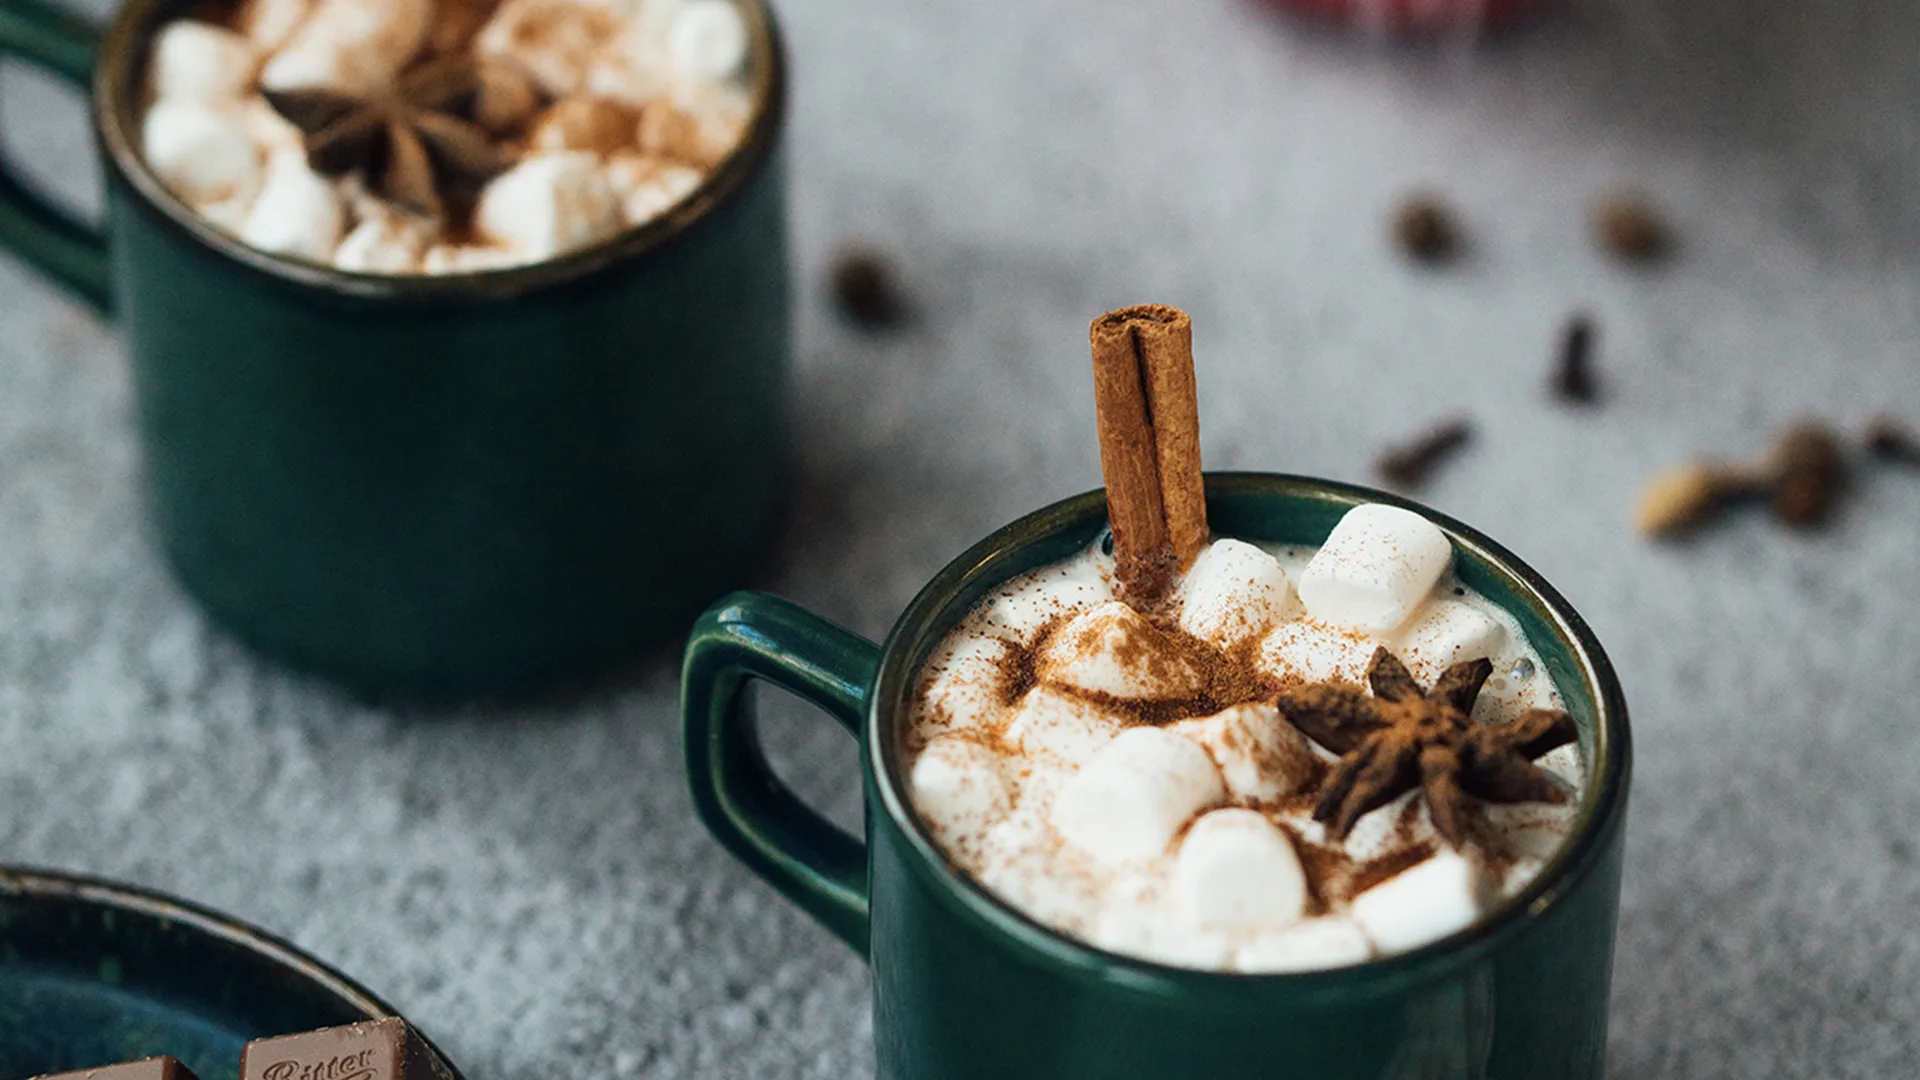 Hot chocolates with whipped cream and cinnamon placed on a table